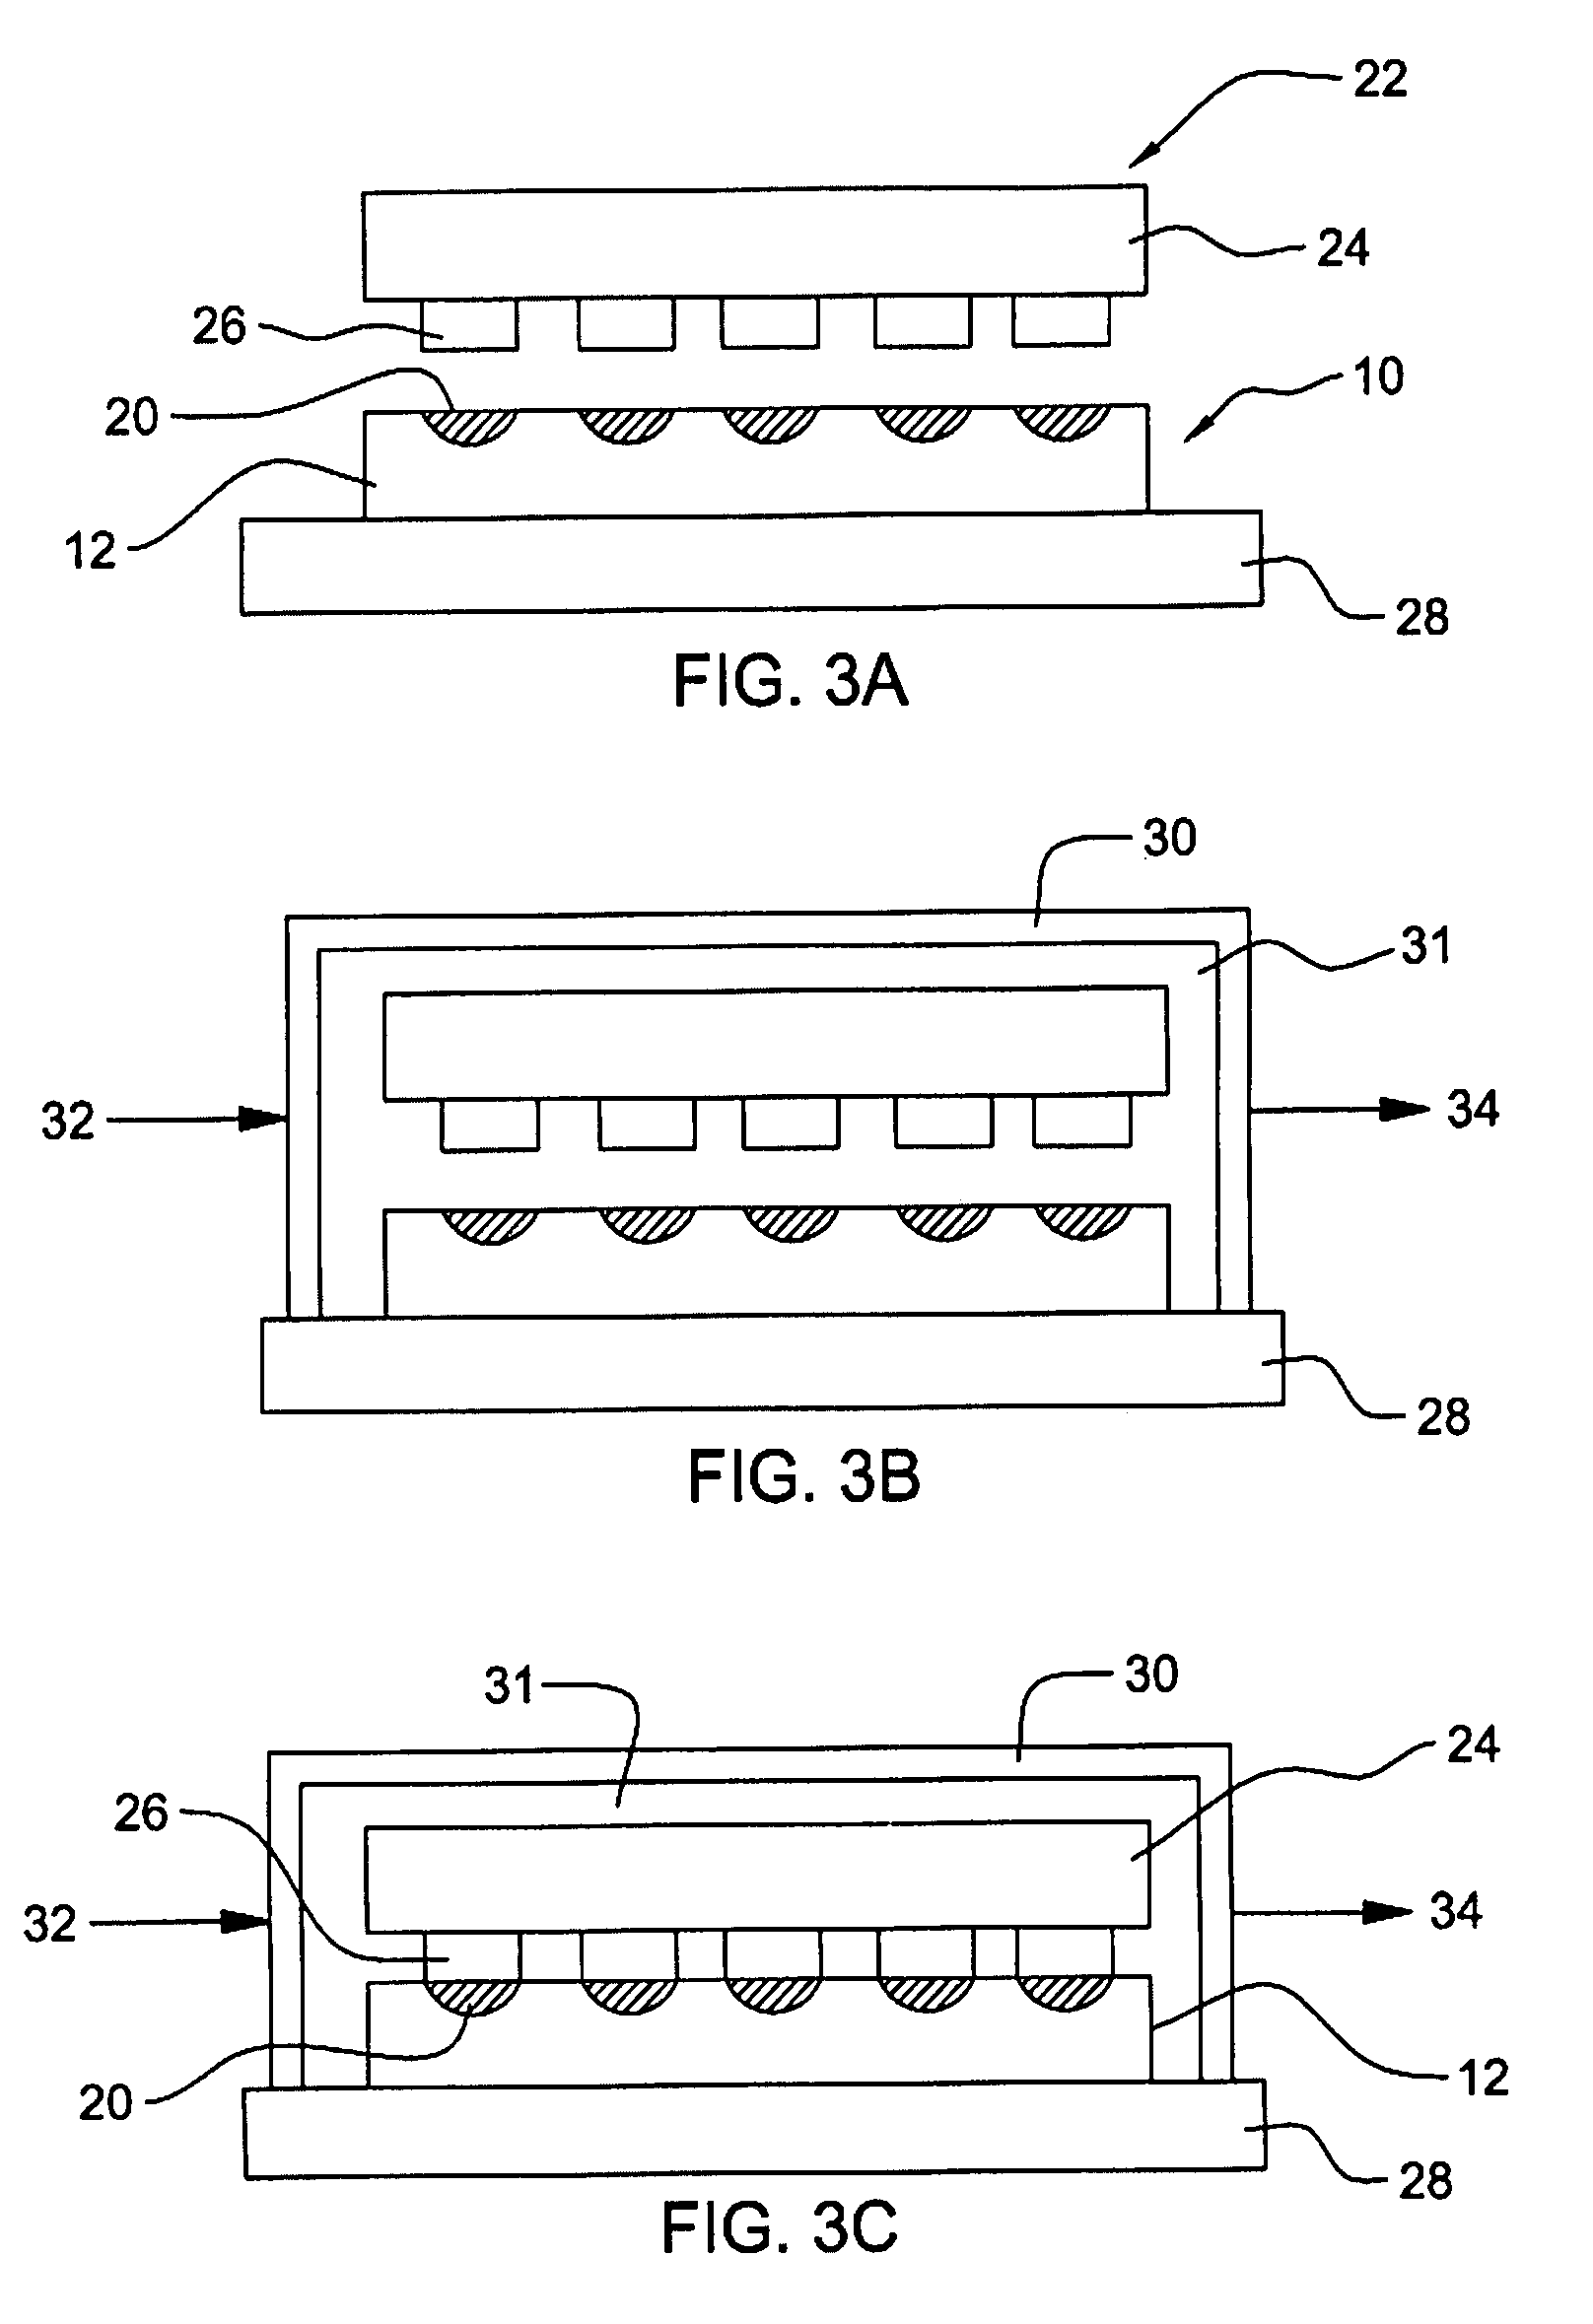 PROCESS FOR MAKING INTERCONNECT SOLDER Pb-FREE BUMPS FREE FROM ORGANO-TIN/TIN DEPOSITS ON THE WAFER SURFACE